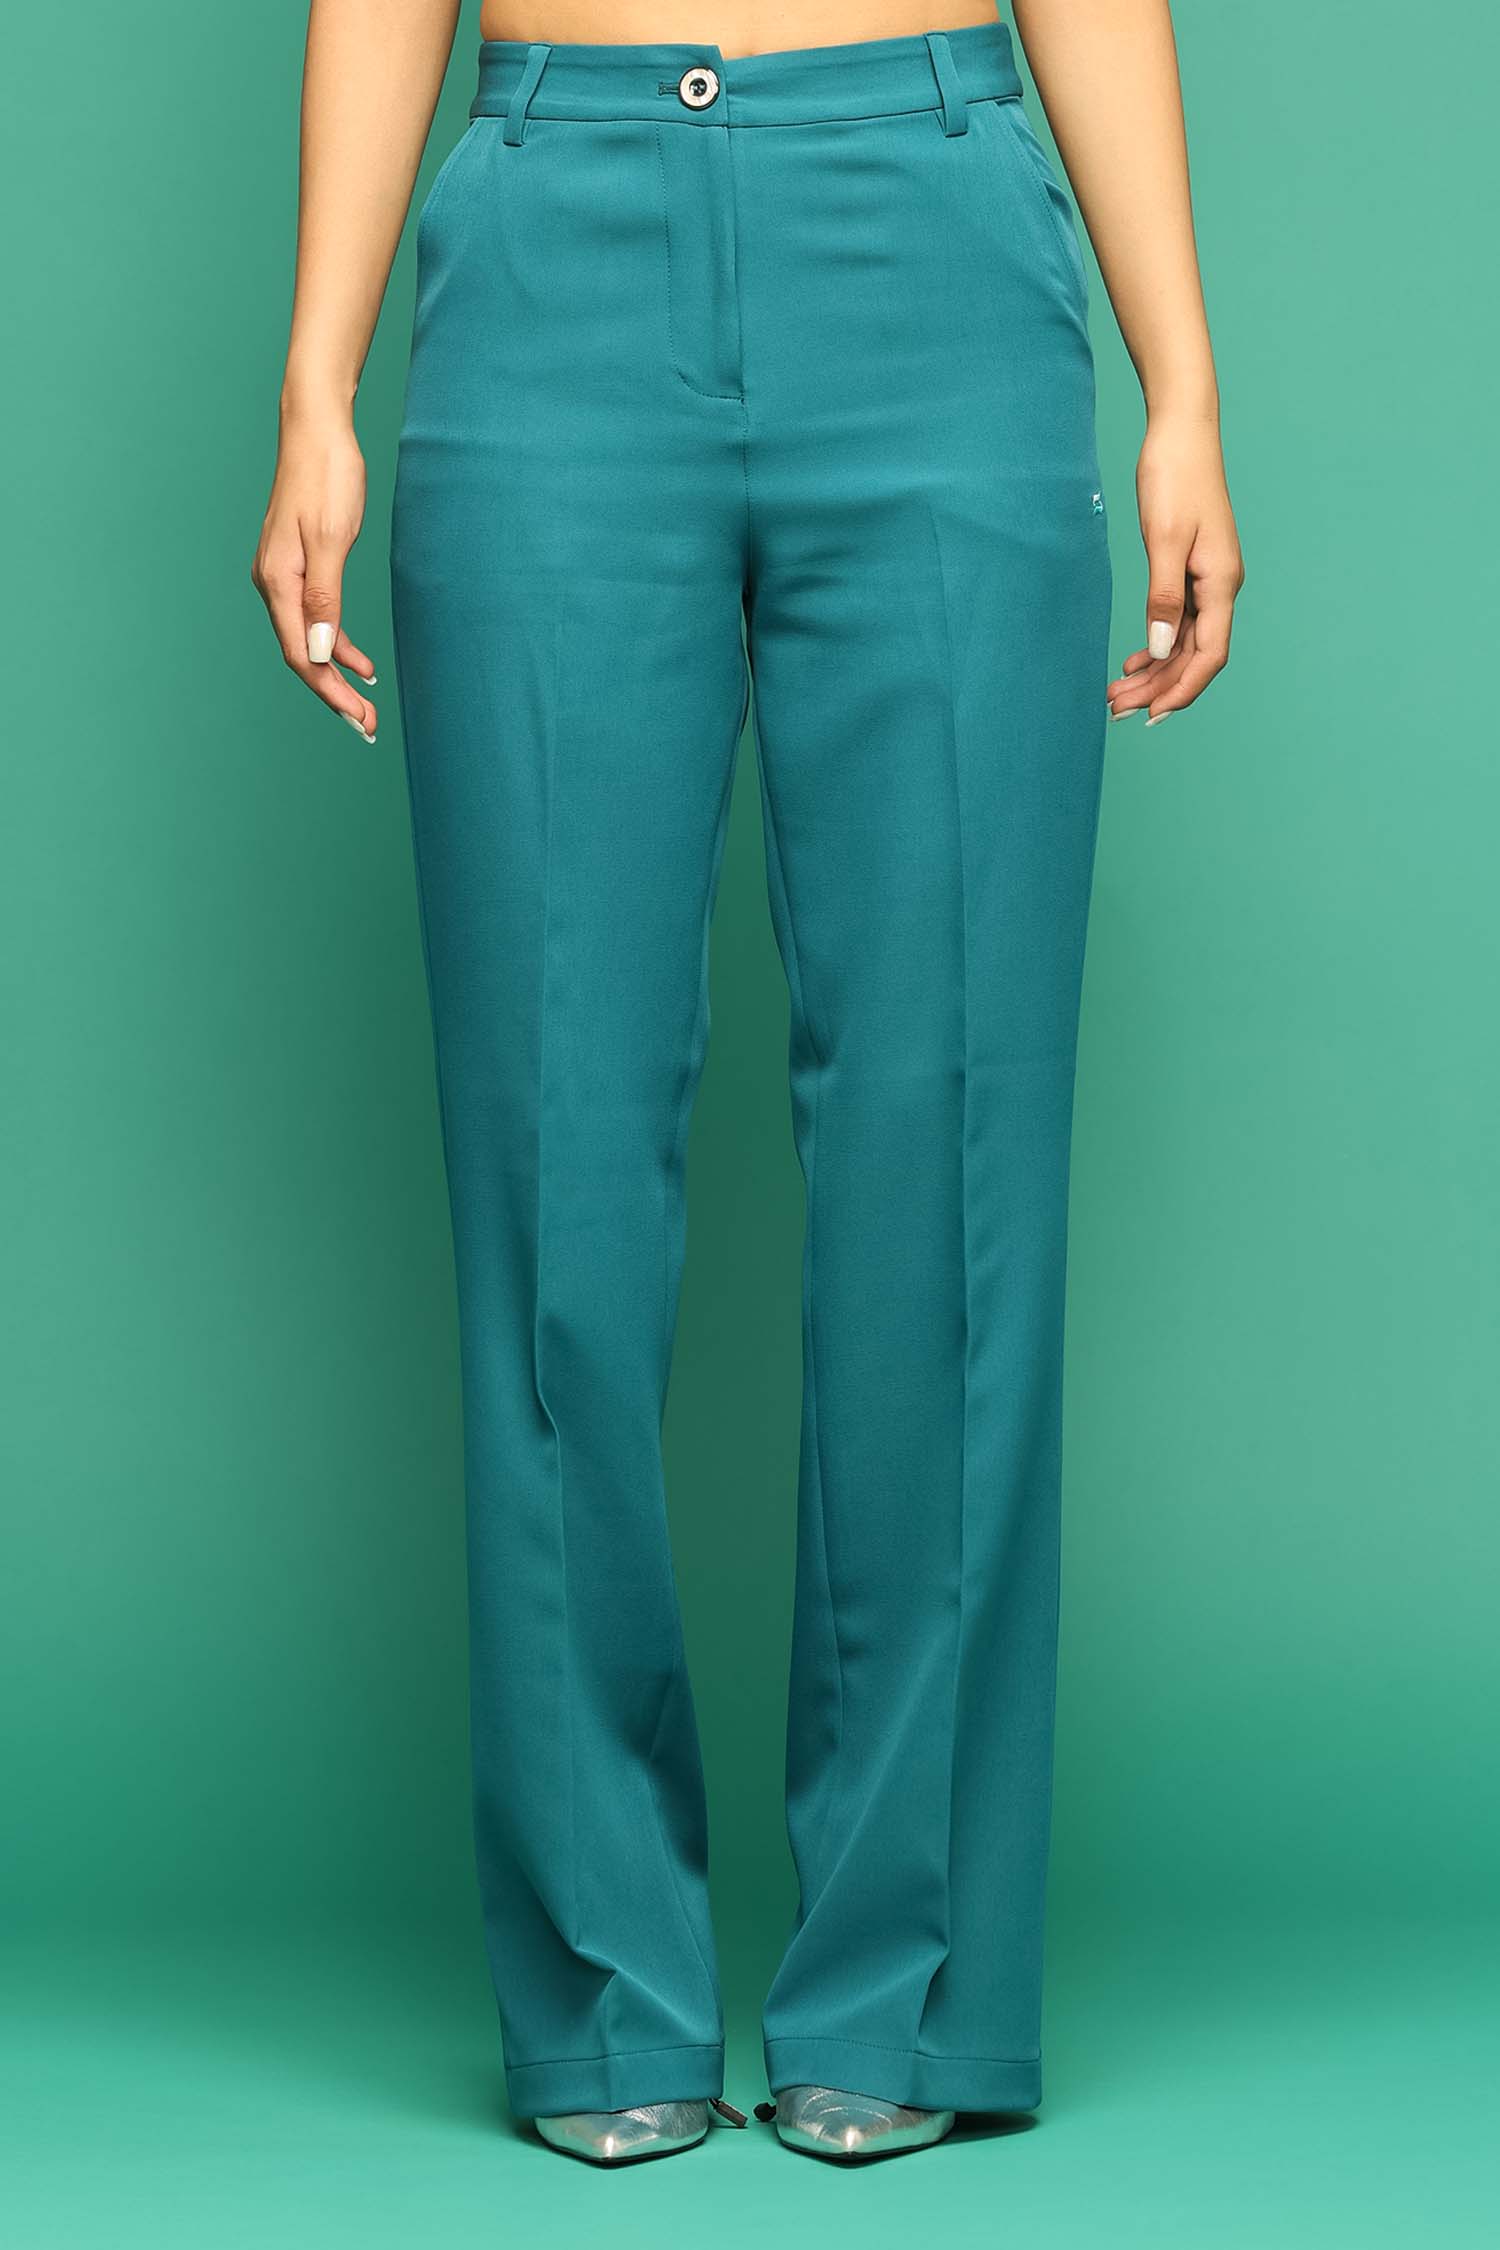 Buy Teal blue Trousers & Pants for Women by Kryptic Online | Ajio.com